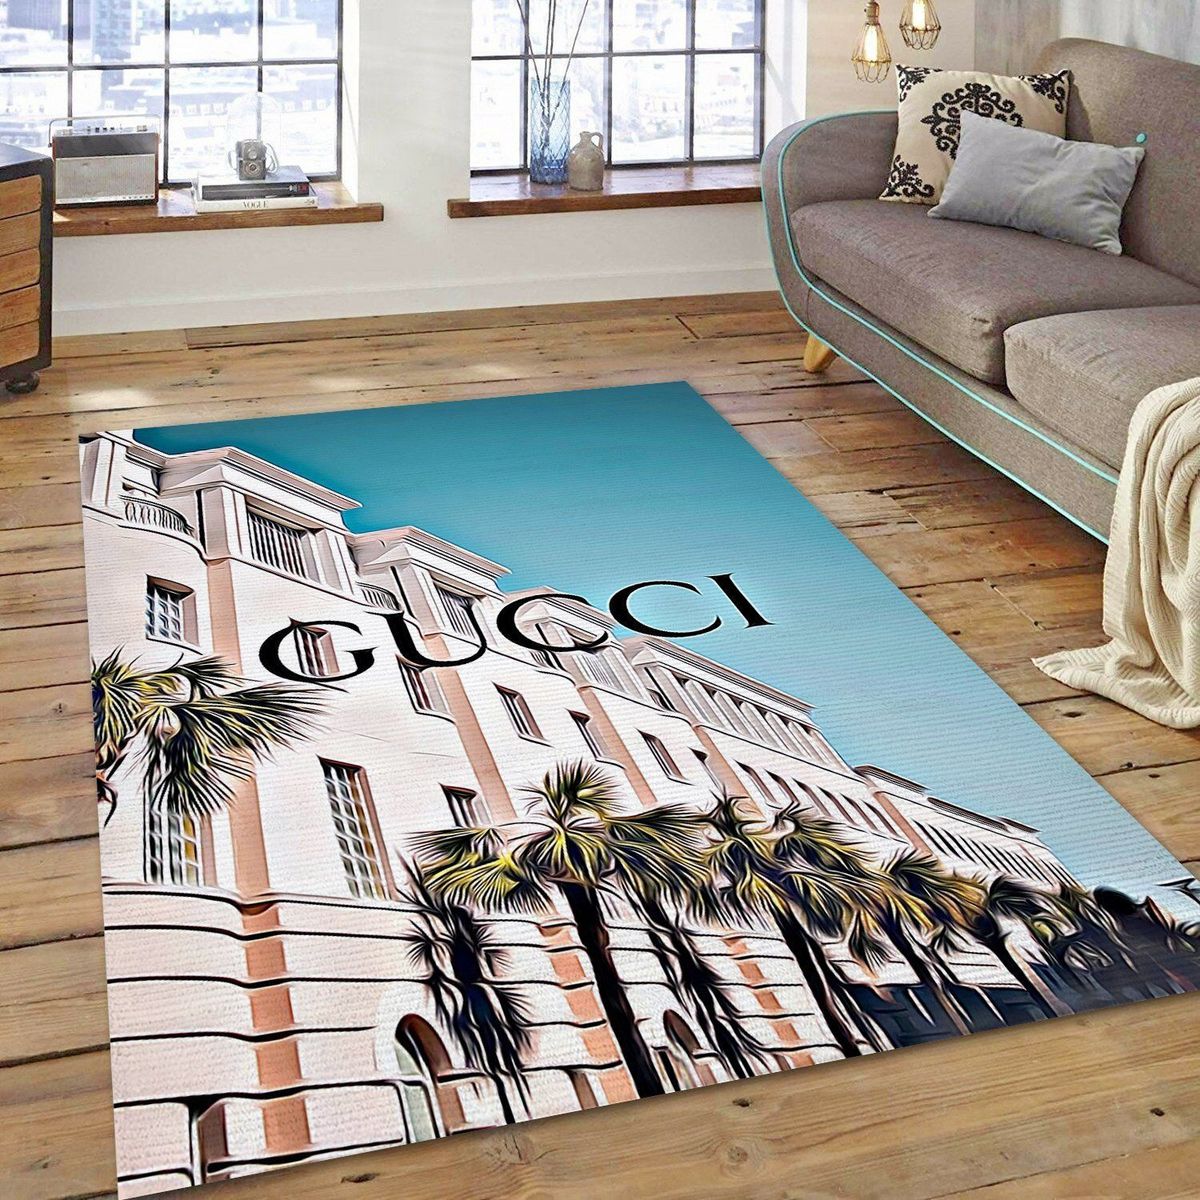 Gucci Vintage Luxury Brand Carpet Rug Limited Edition